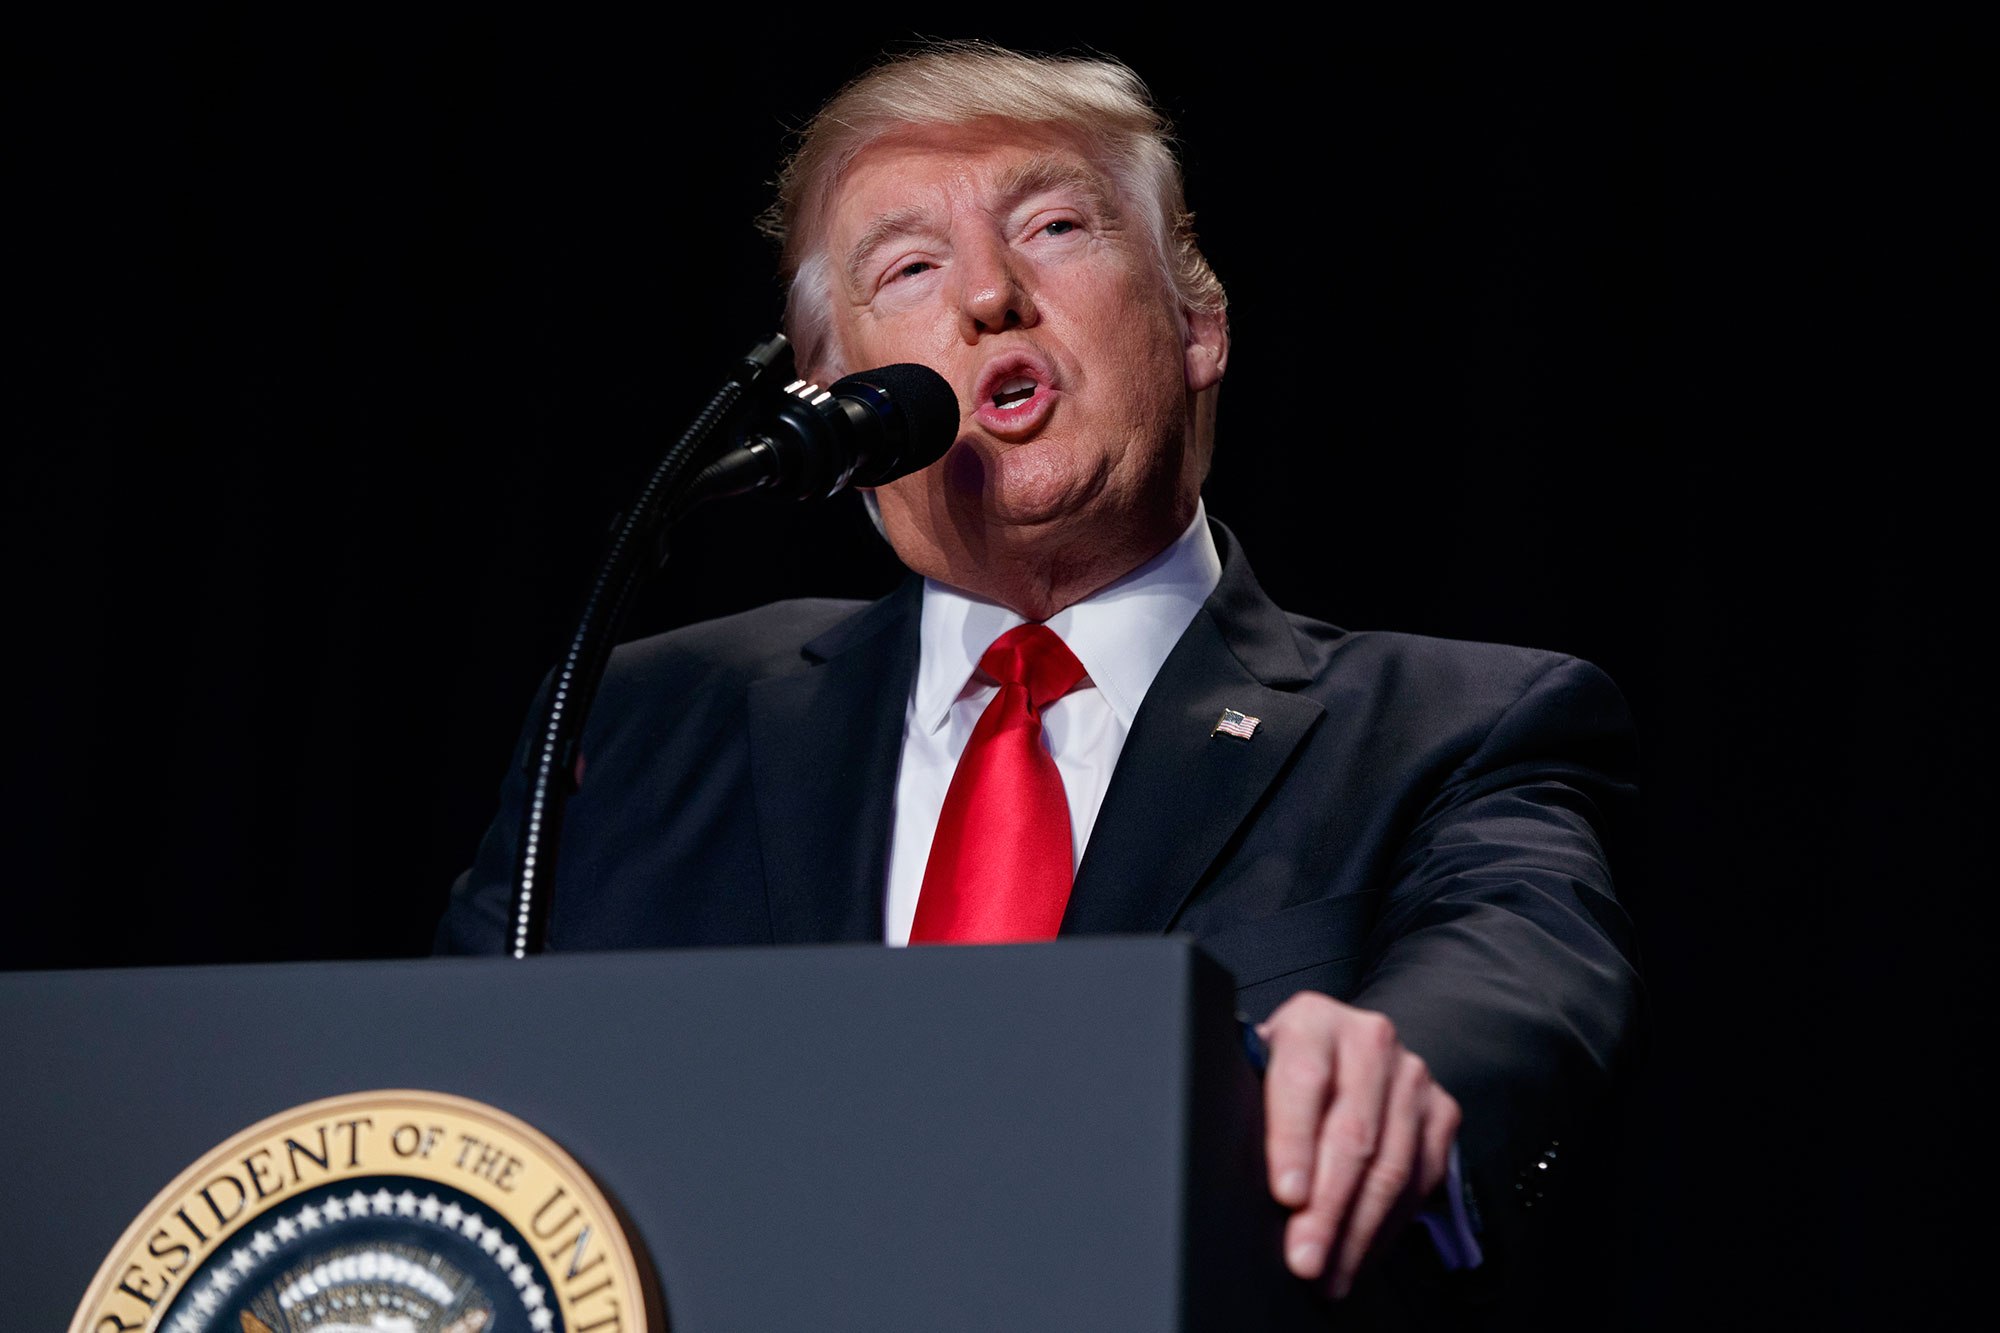 President Donald Trump highlighted the importance of remaining a "nation under God" and protecting religious liberty during a speech delivered at the National Prayer Breakfast in Washington on Thursday.